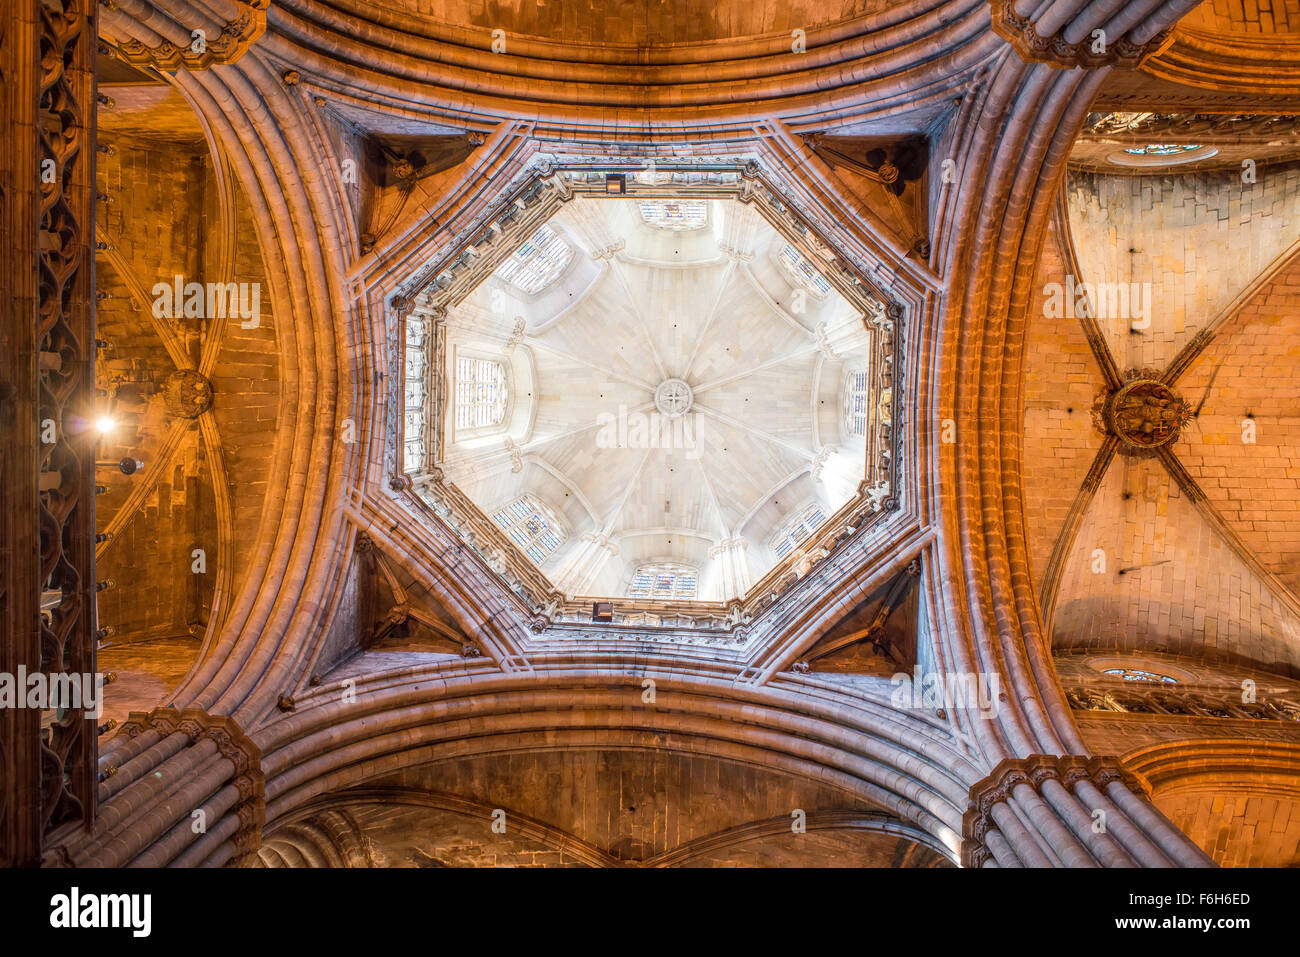 Ceiling detail of Santa Eulalia, Metropolitan Cathedral Basilica of Barcelona, Spain. Gothic style architecture. Barcelona. Stock Photo